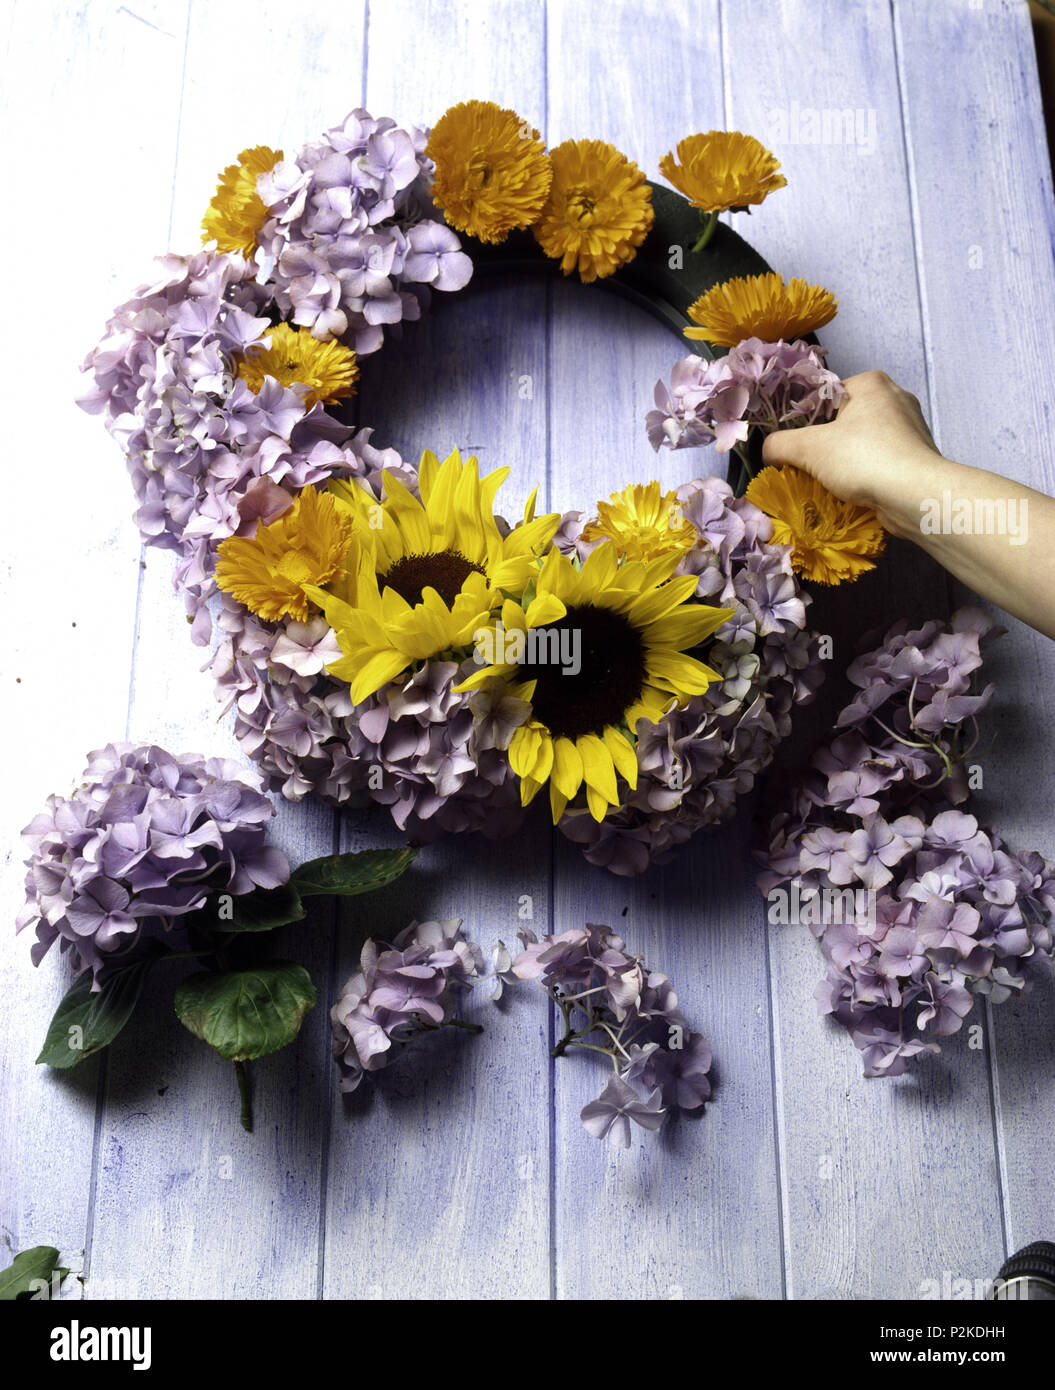 Close-up of a hand attaching sunflowers and mauve hydrangeas to an oasis ring Stock Photo